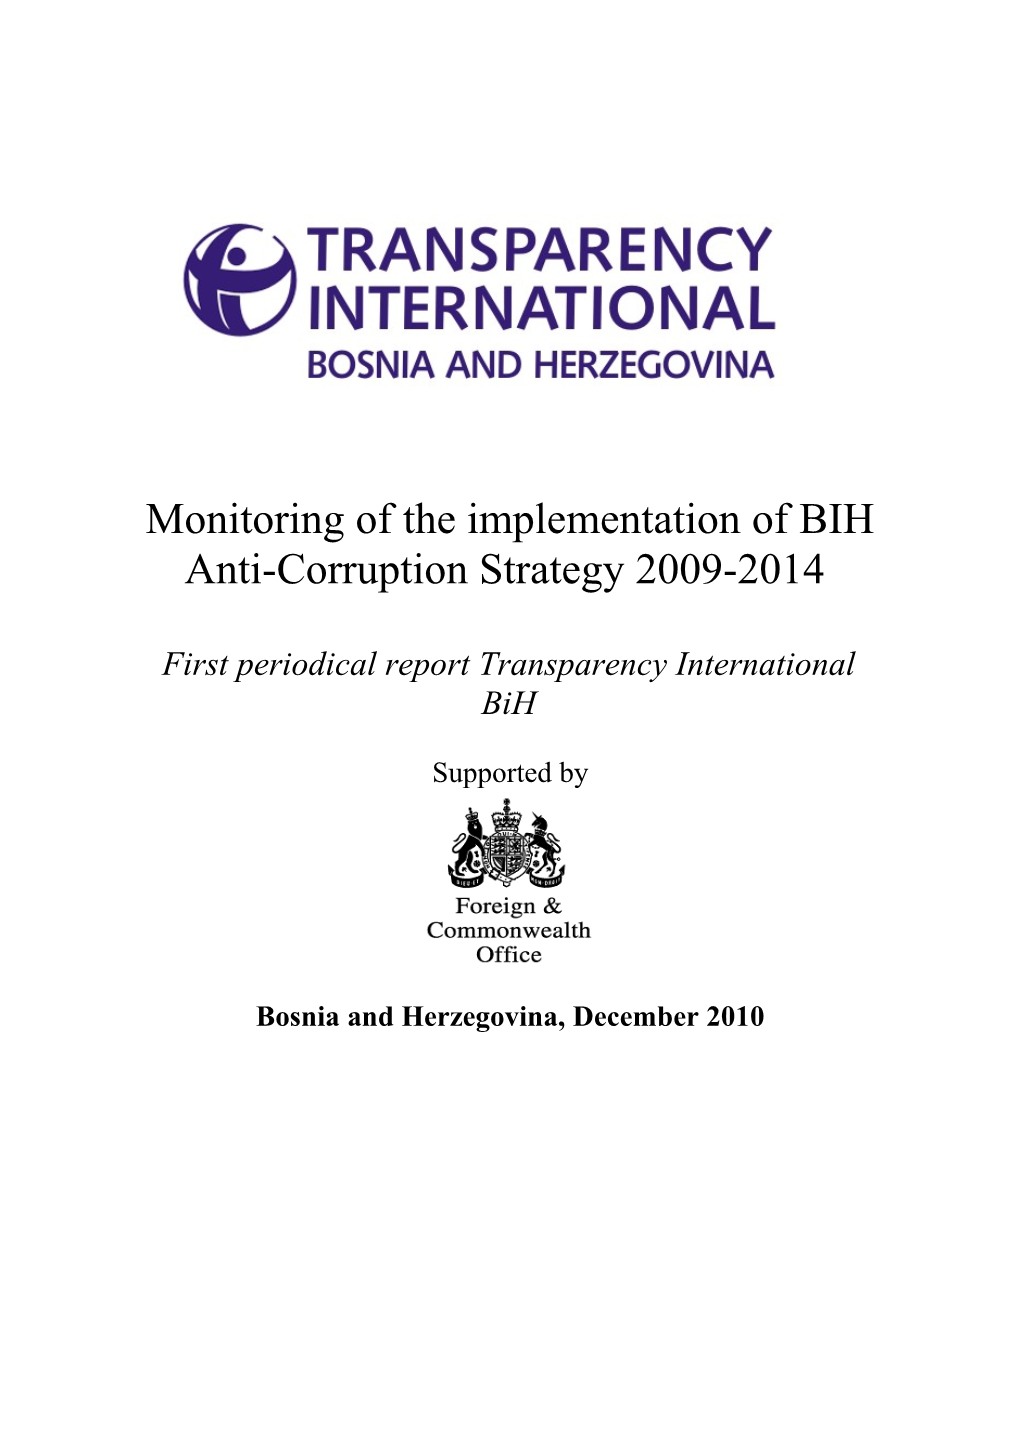 Monitoring of the Implementation of Bih Anti-Corruption Strategy 2009-2014